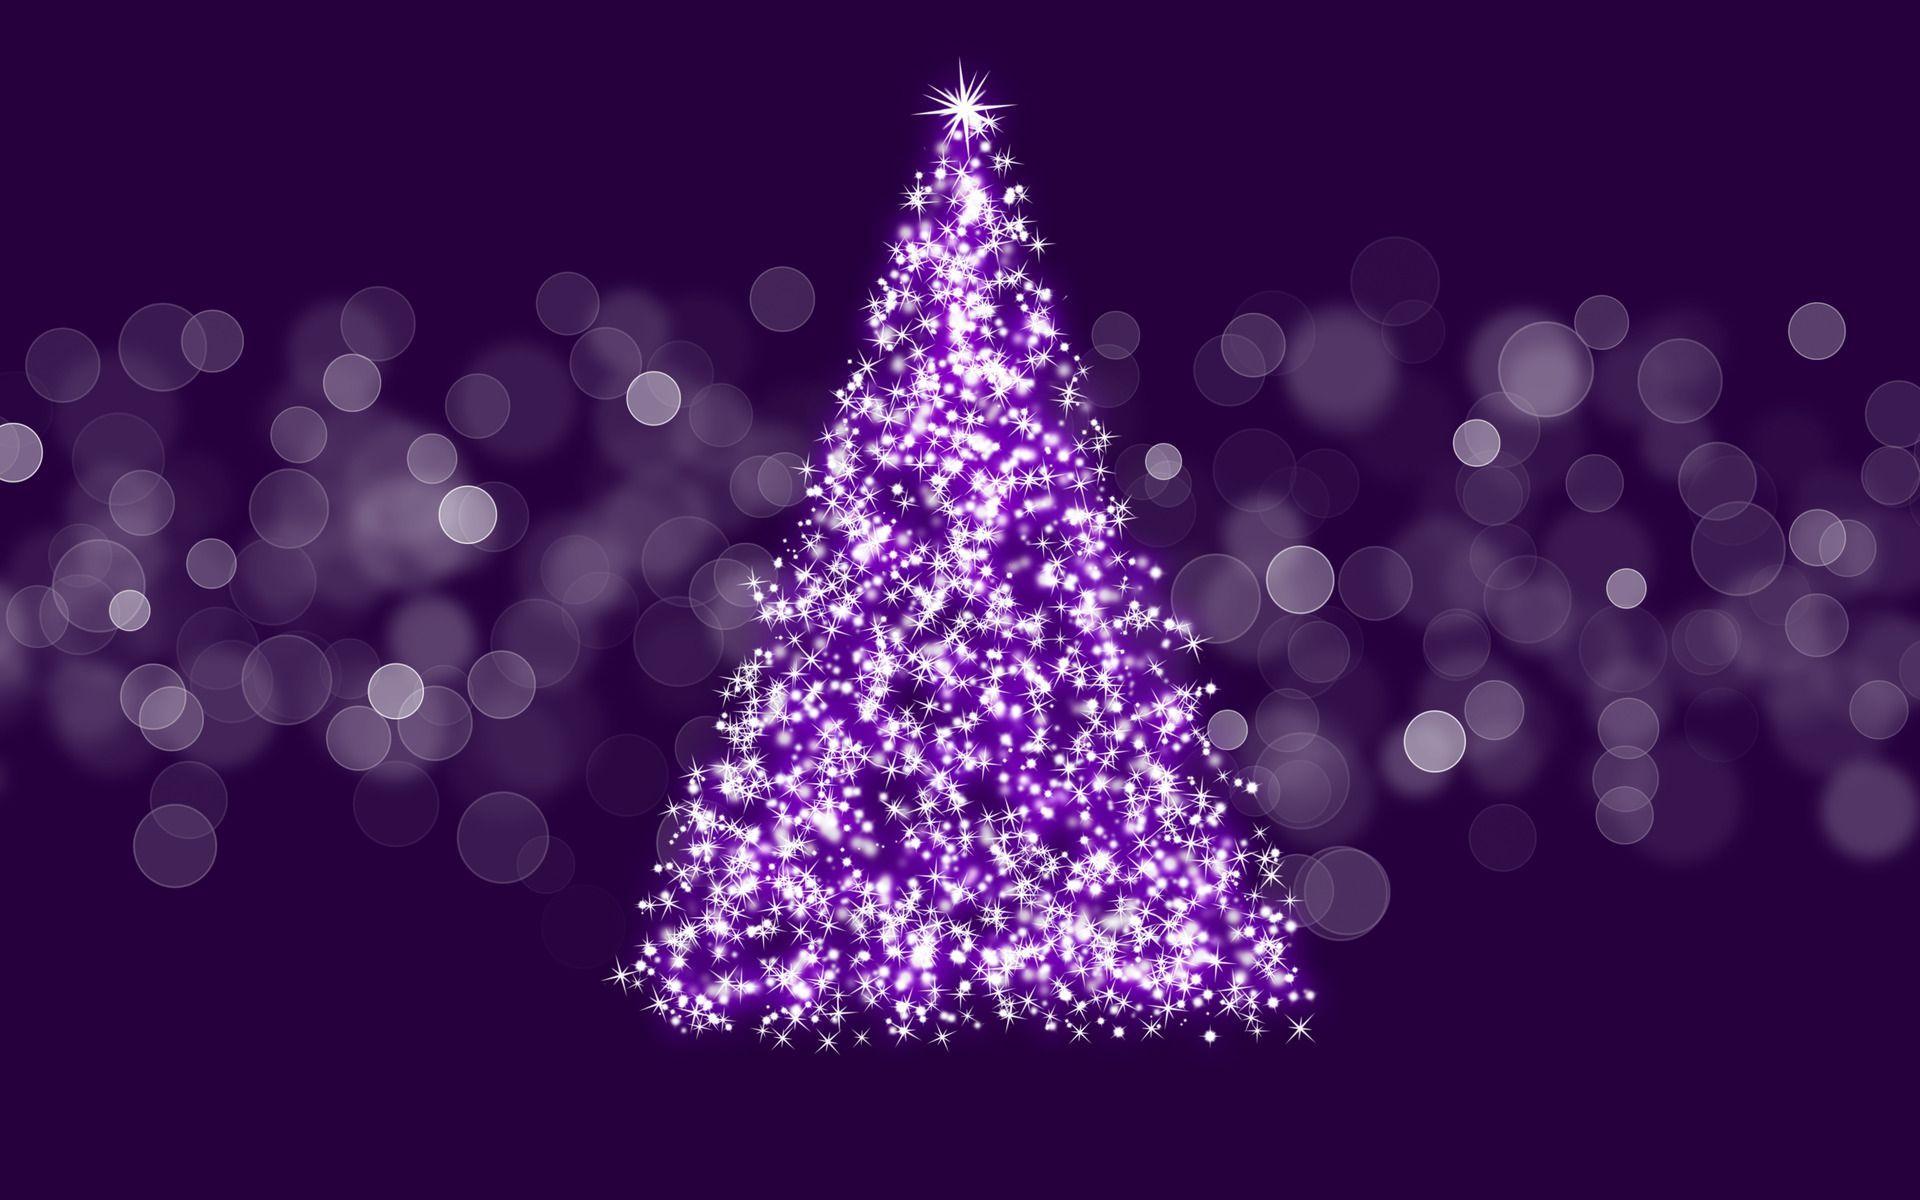 Get inspired christmas decorations in purple To create a festive look